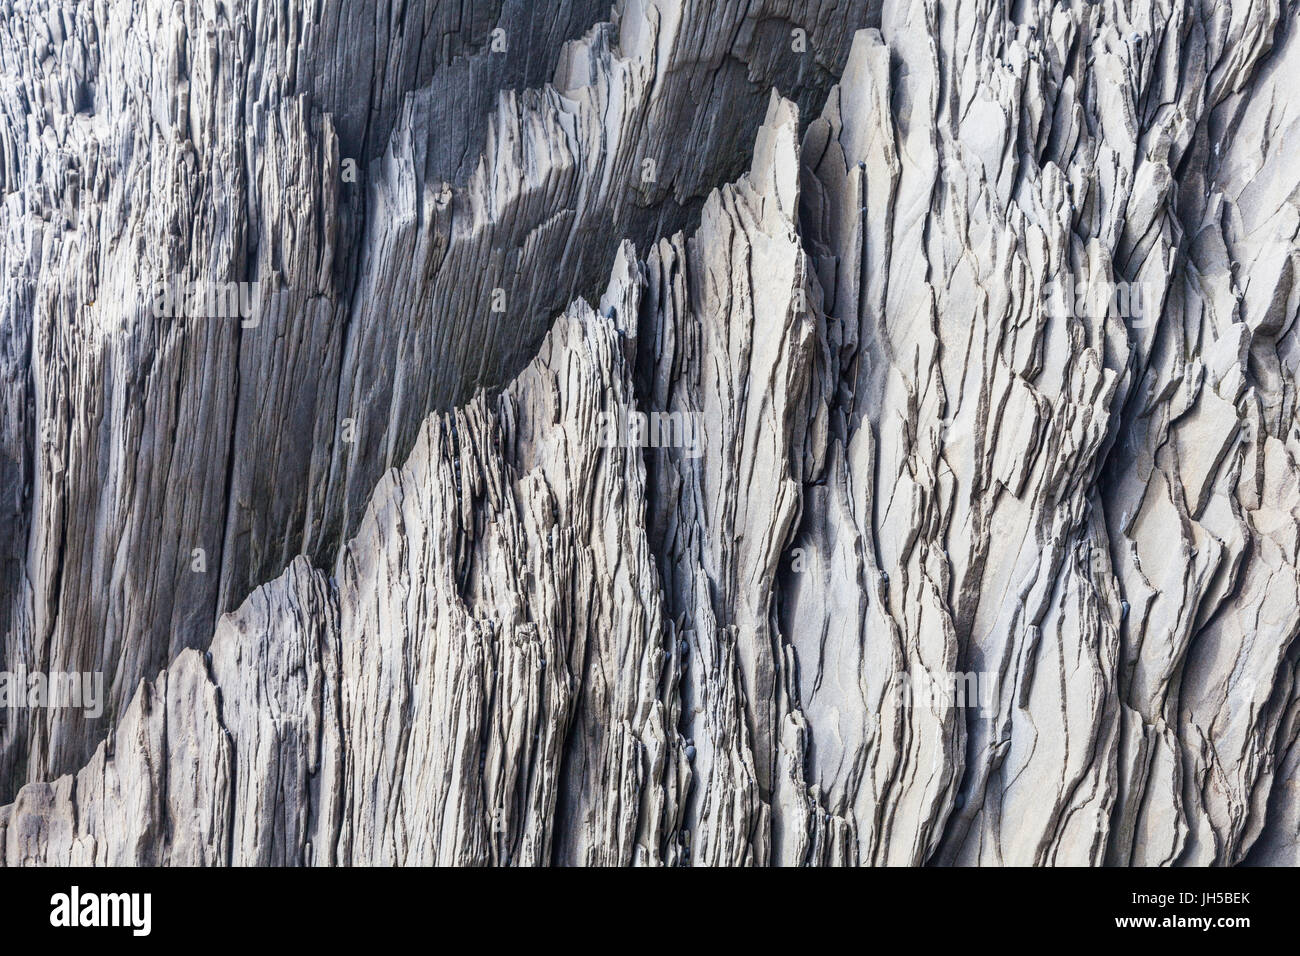 Shale-like rock depositions at the base of the cliffs on Reynisfjara beach in Iceland Stock Photo